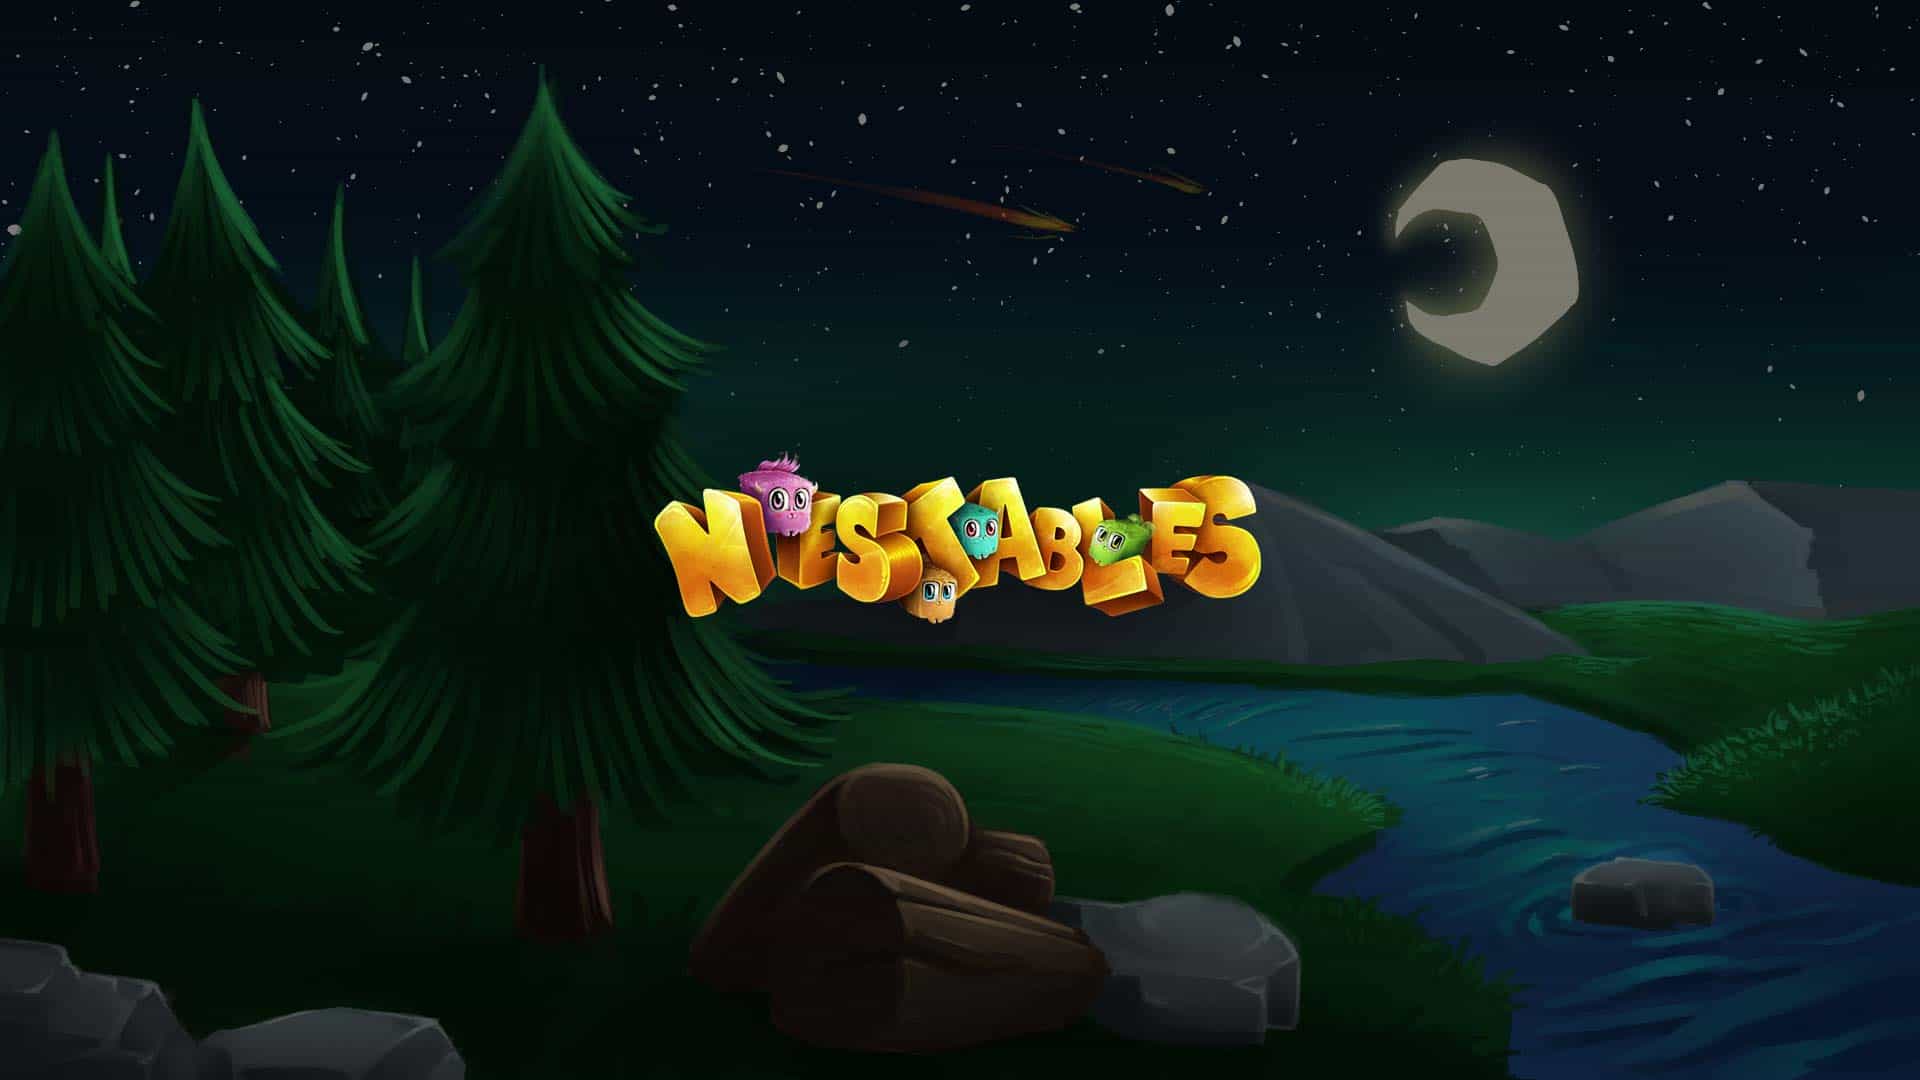 NESTABLES 132 Mark the 27th of July in your calendar because the presale of Nestables is going to start at 9 PM UTC as announced by Tribal Gaming, the company behind the development of the Multiverse Blockchain game.